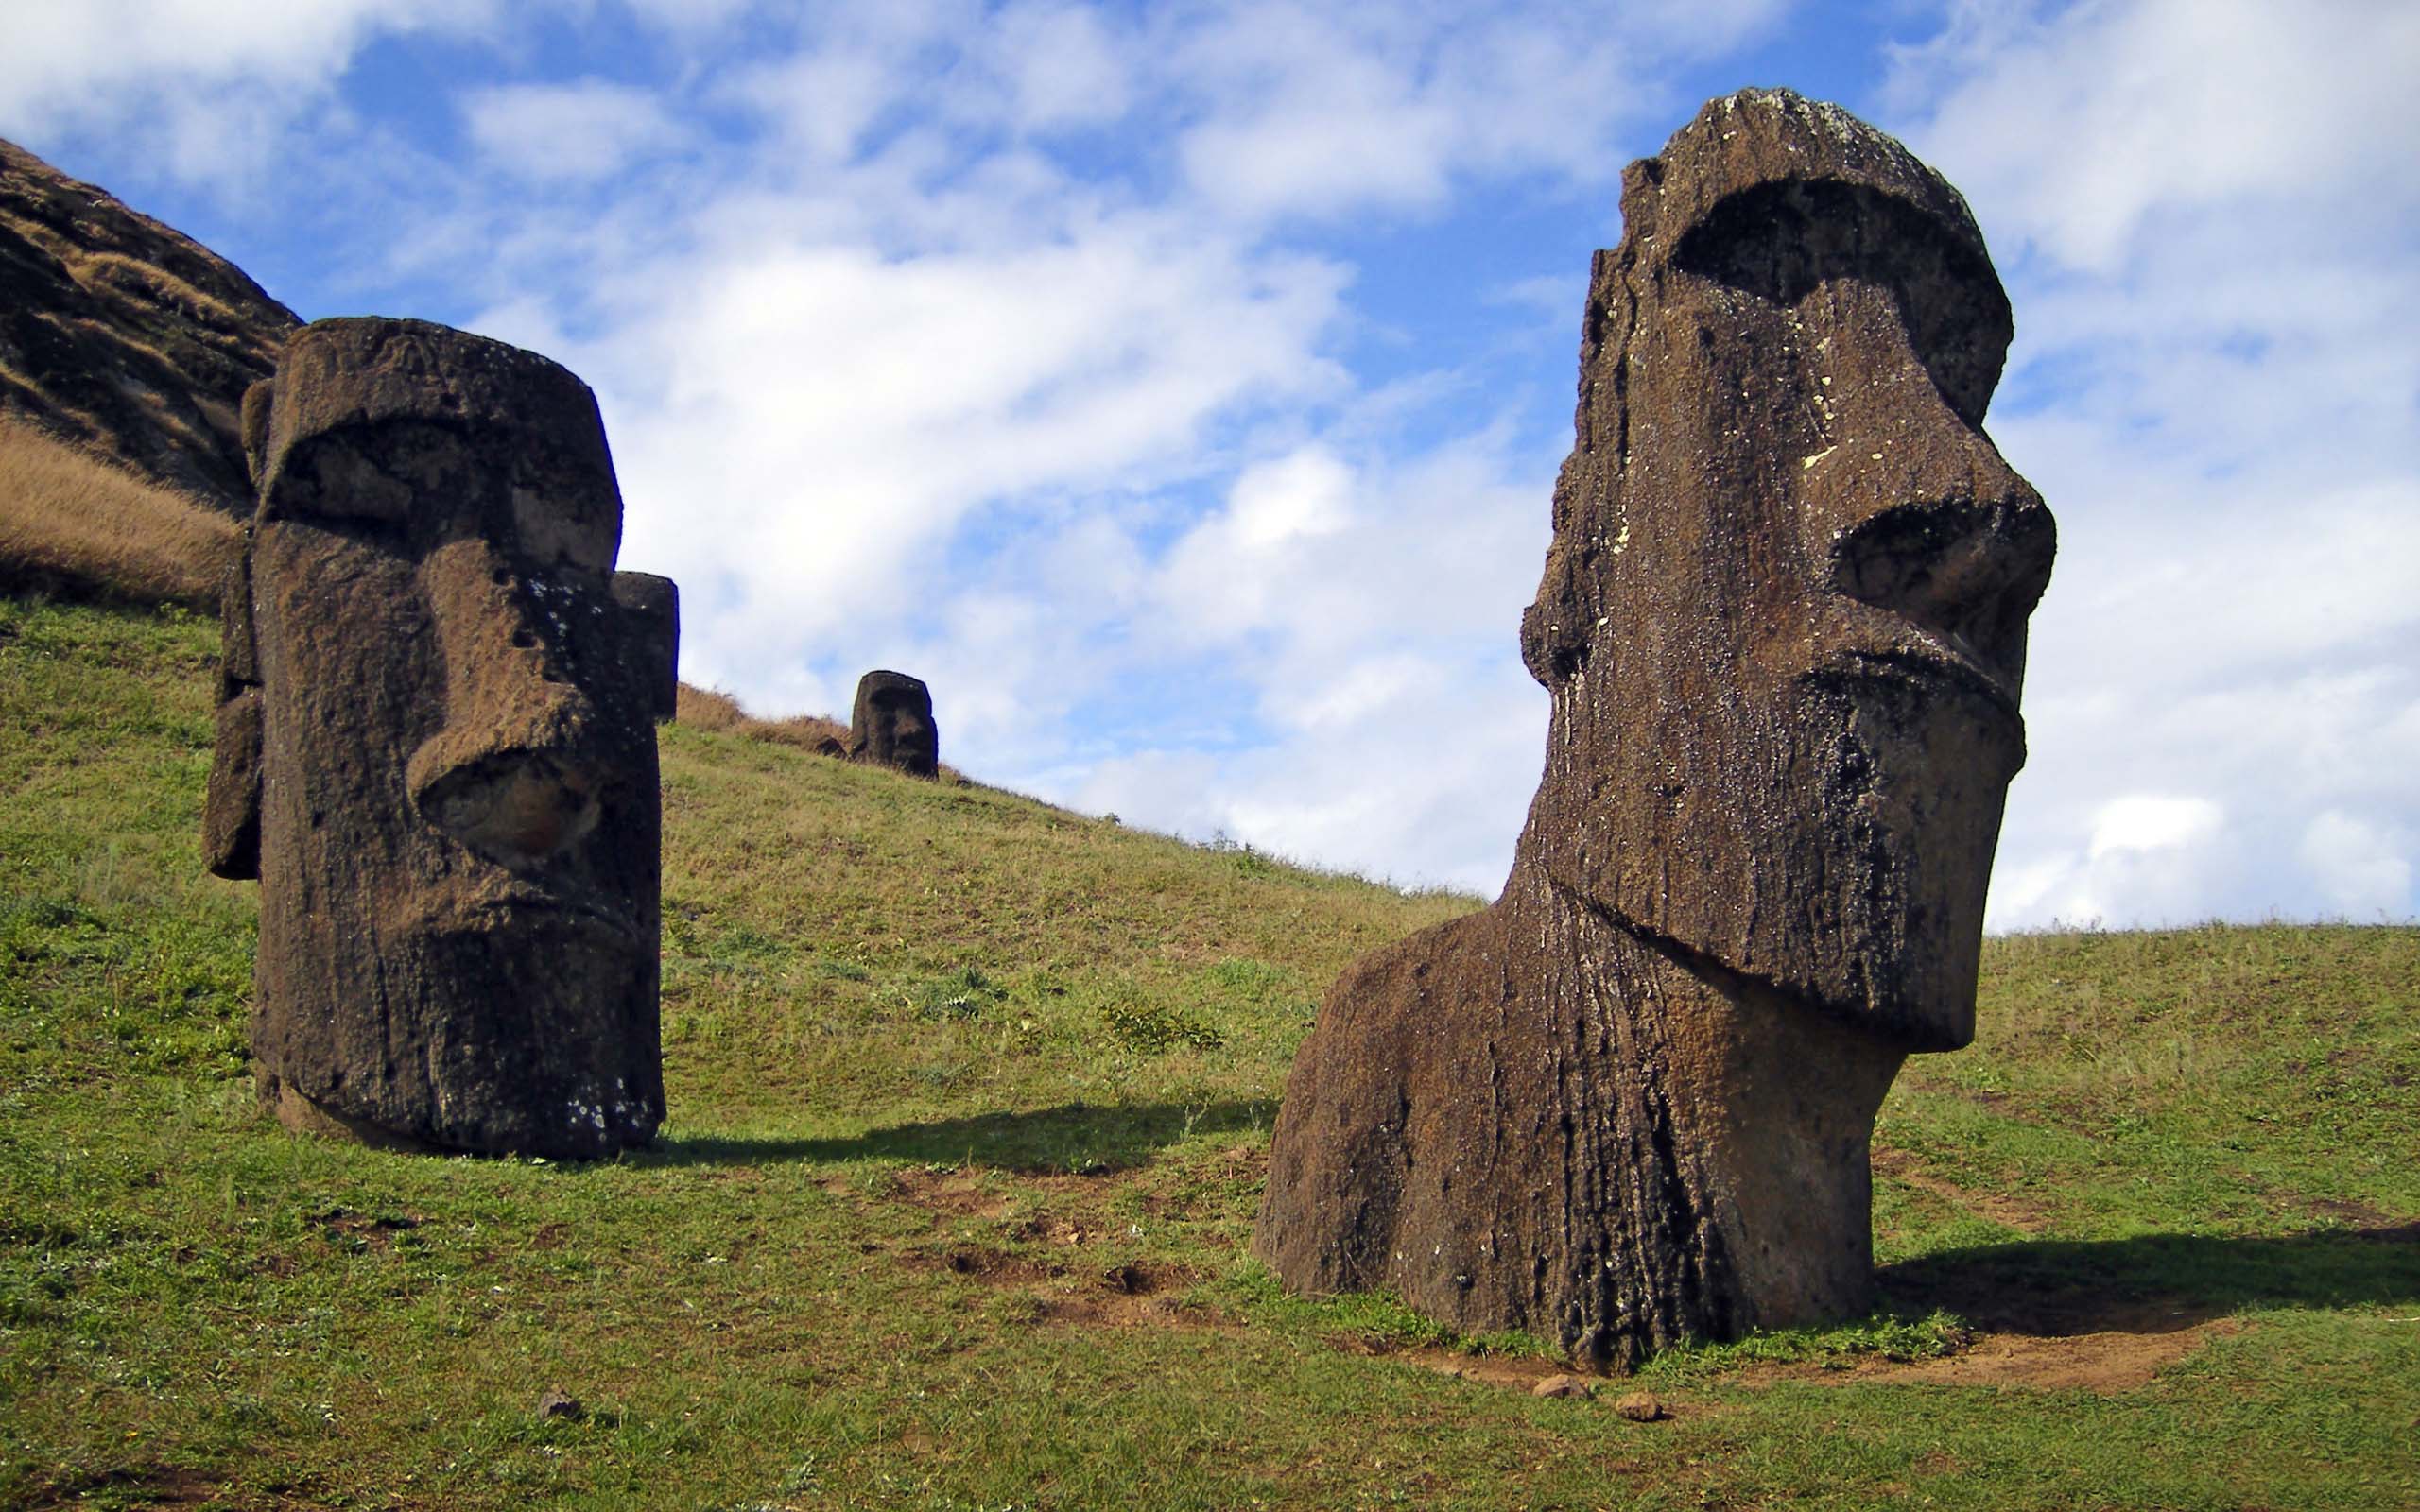 the statues on Easter Islands, Rapa Nui